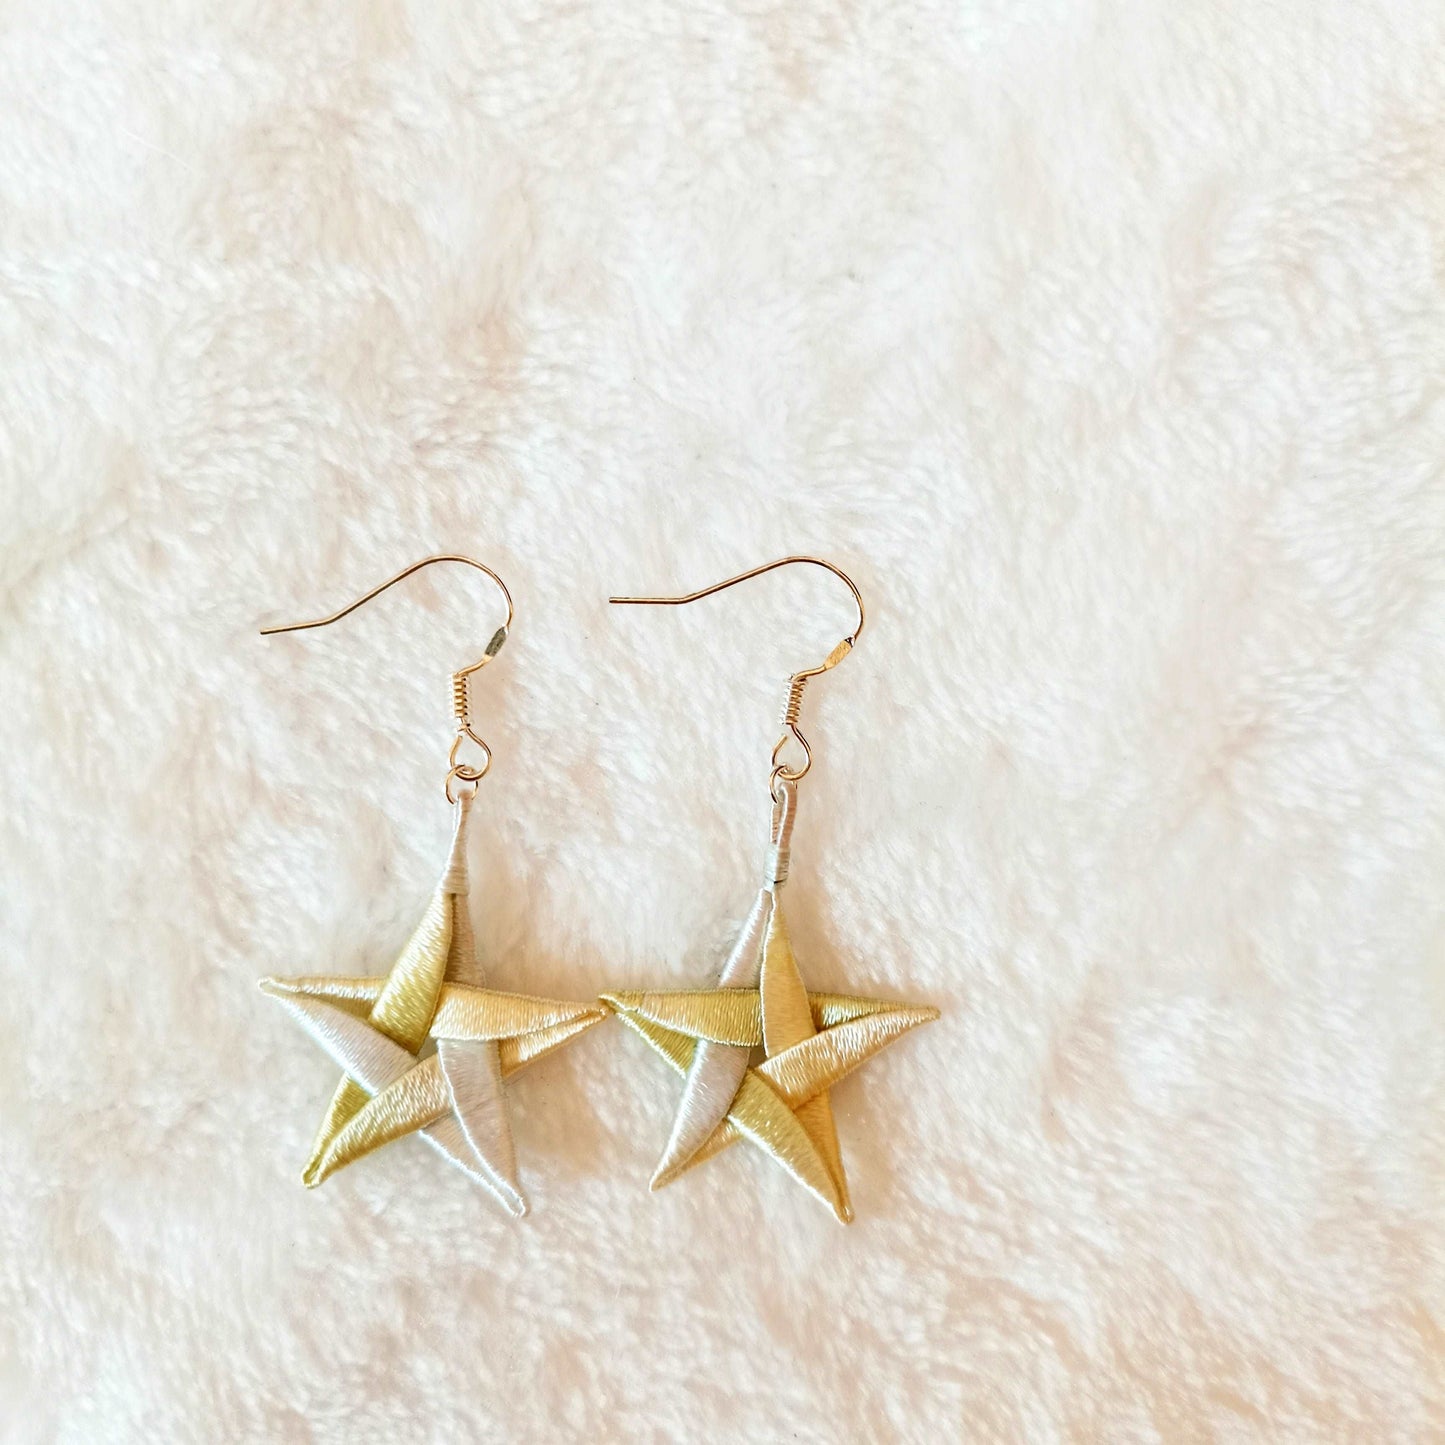 Wire Wrapped Star Earrings for Fashion Enthusiasts